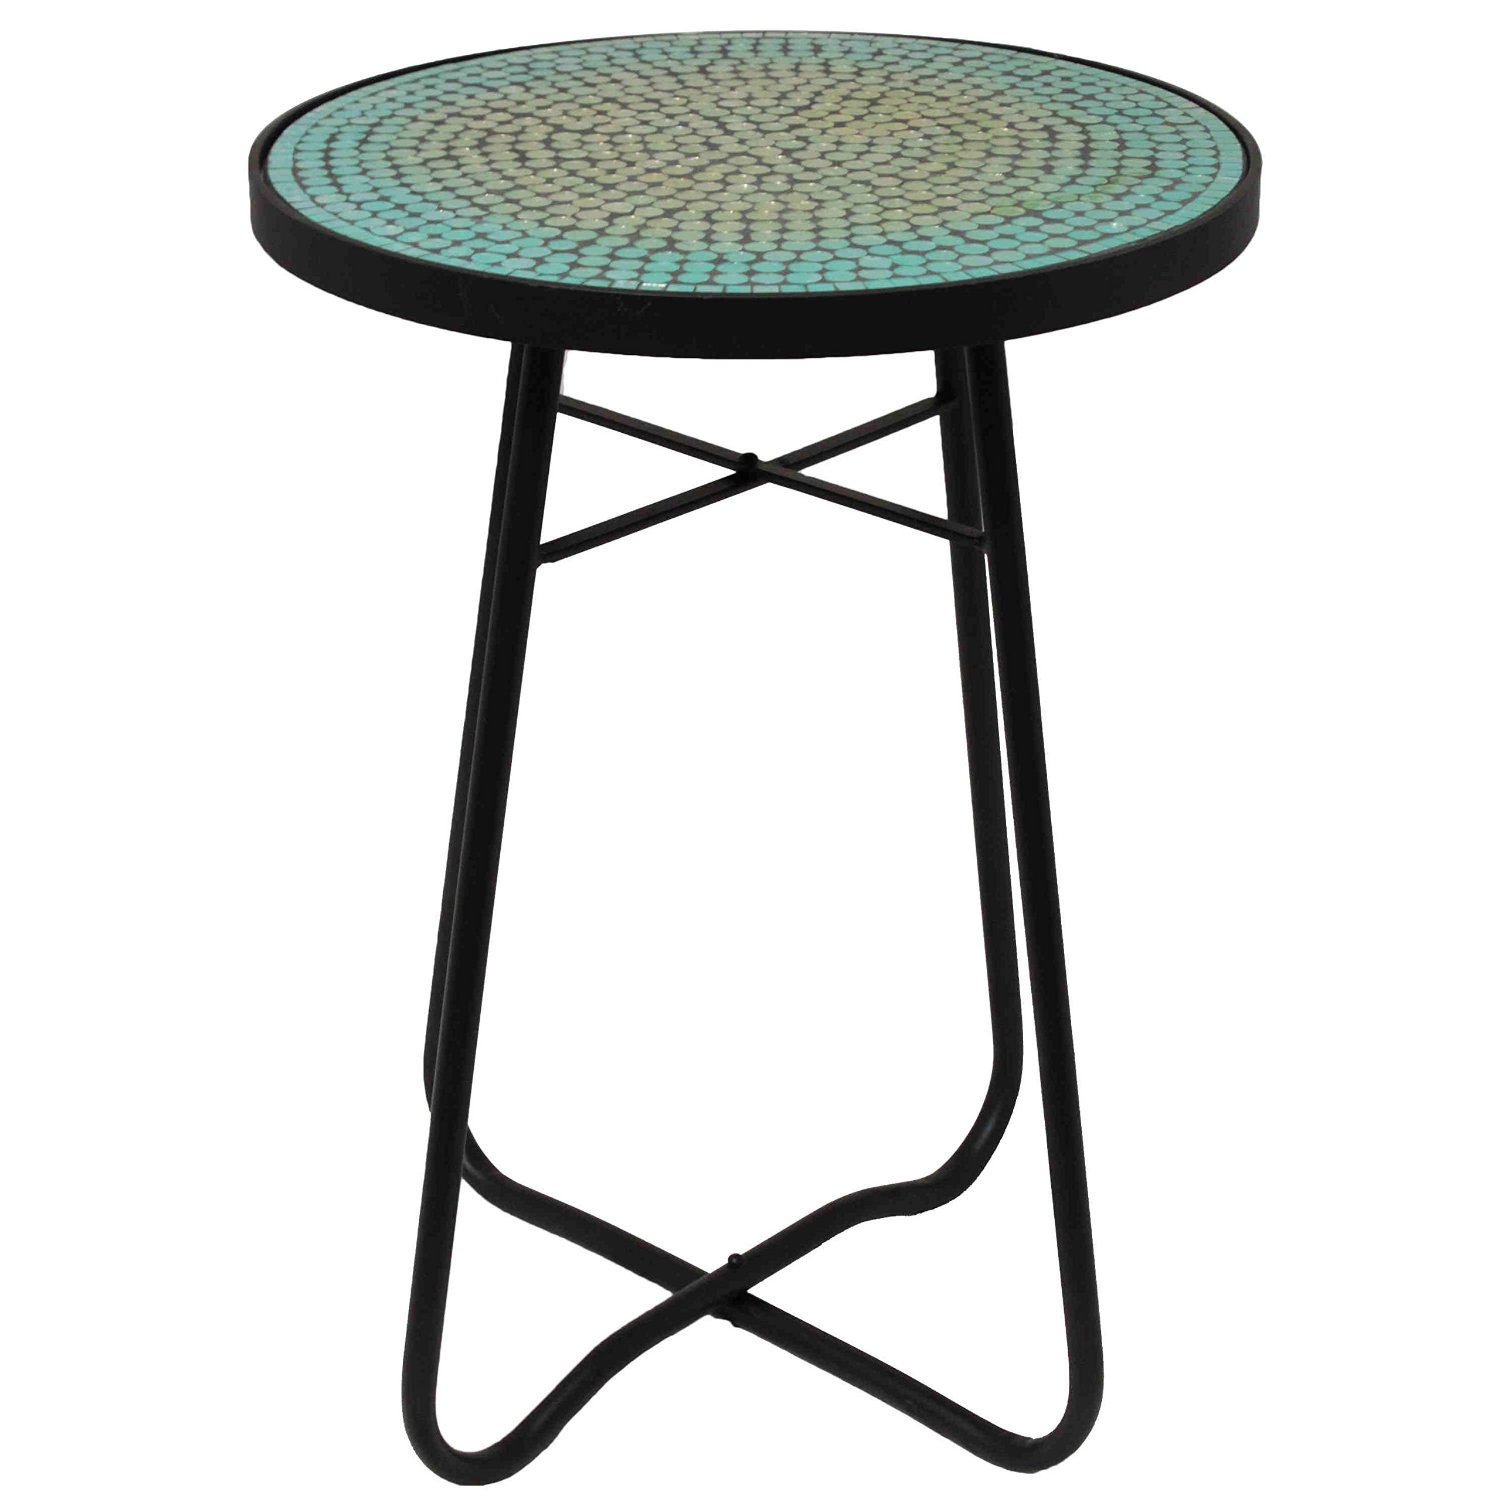 round glass accent table find bella green mosaic outdoor get quotations side contemporary style crafted unique coffee tables and end blue trunk circular patio furniture covers